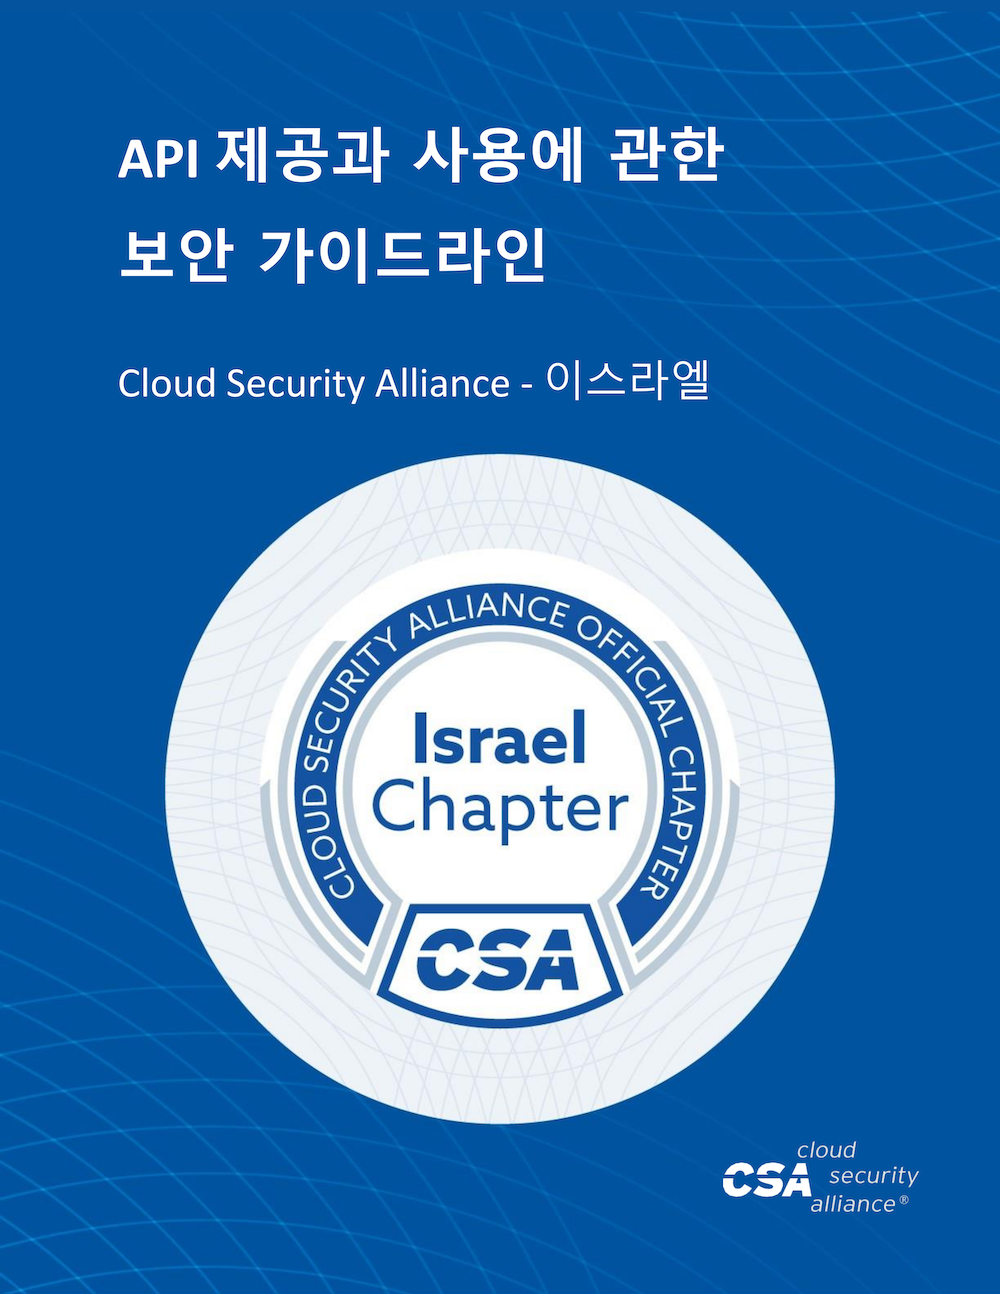 Security Guidelines for Providing and Consuming APIs - Korean Translation